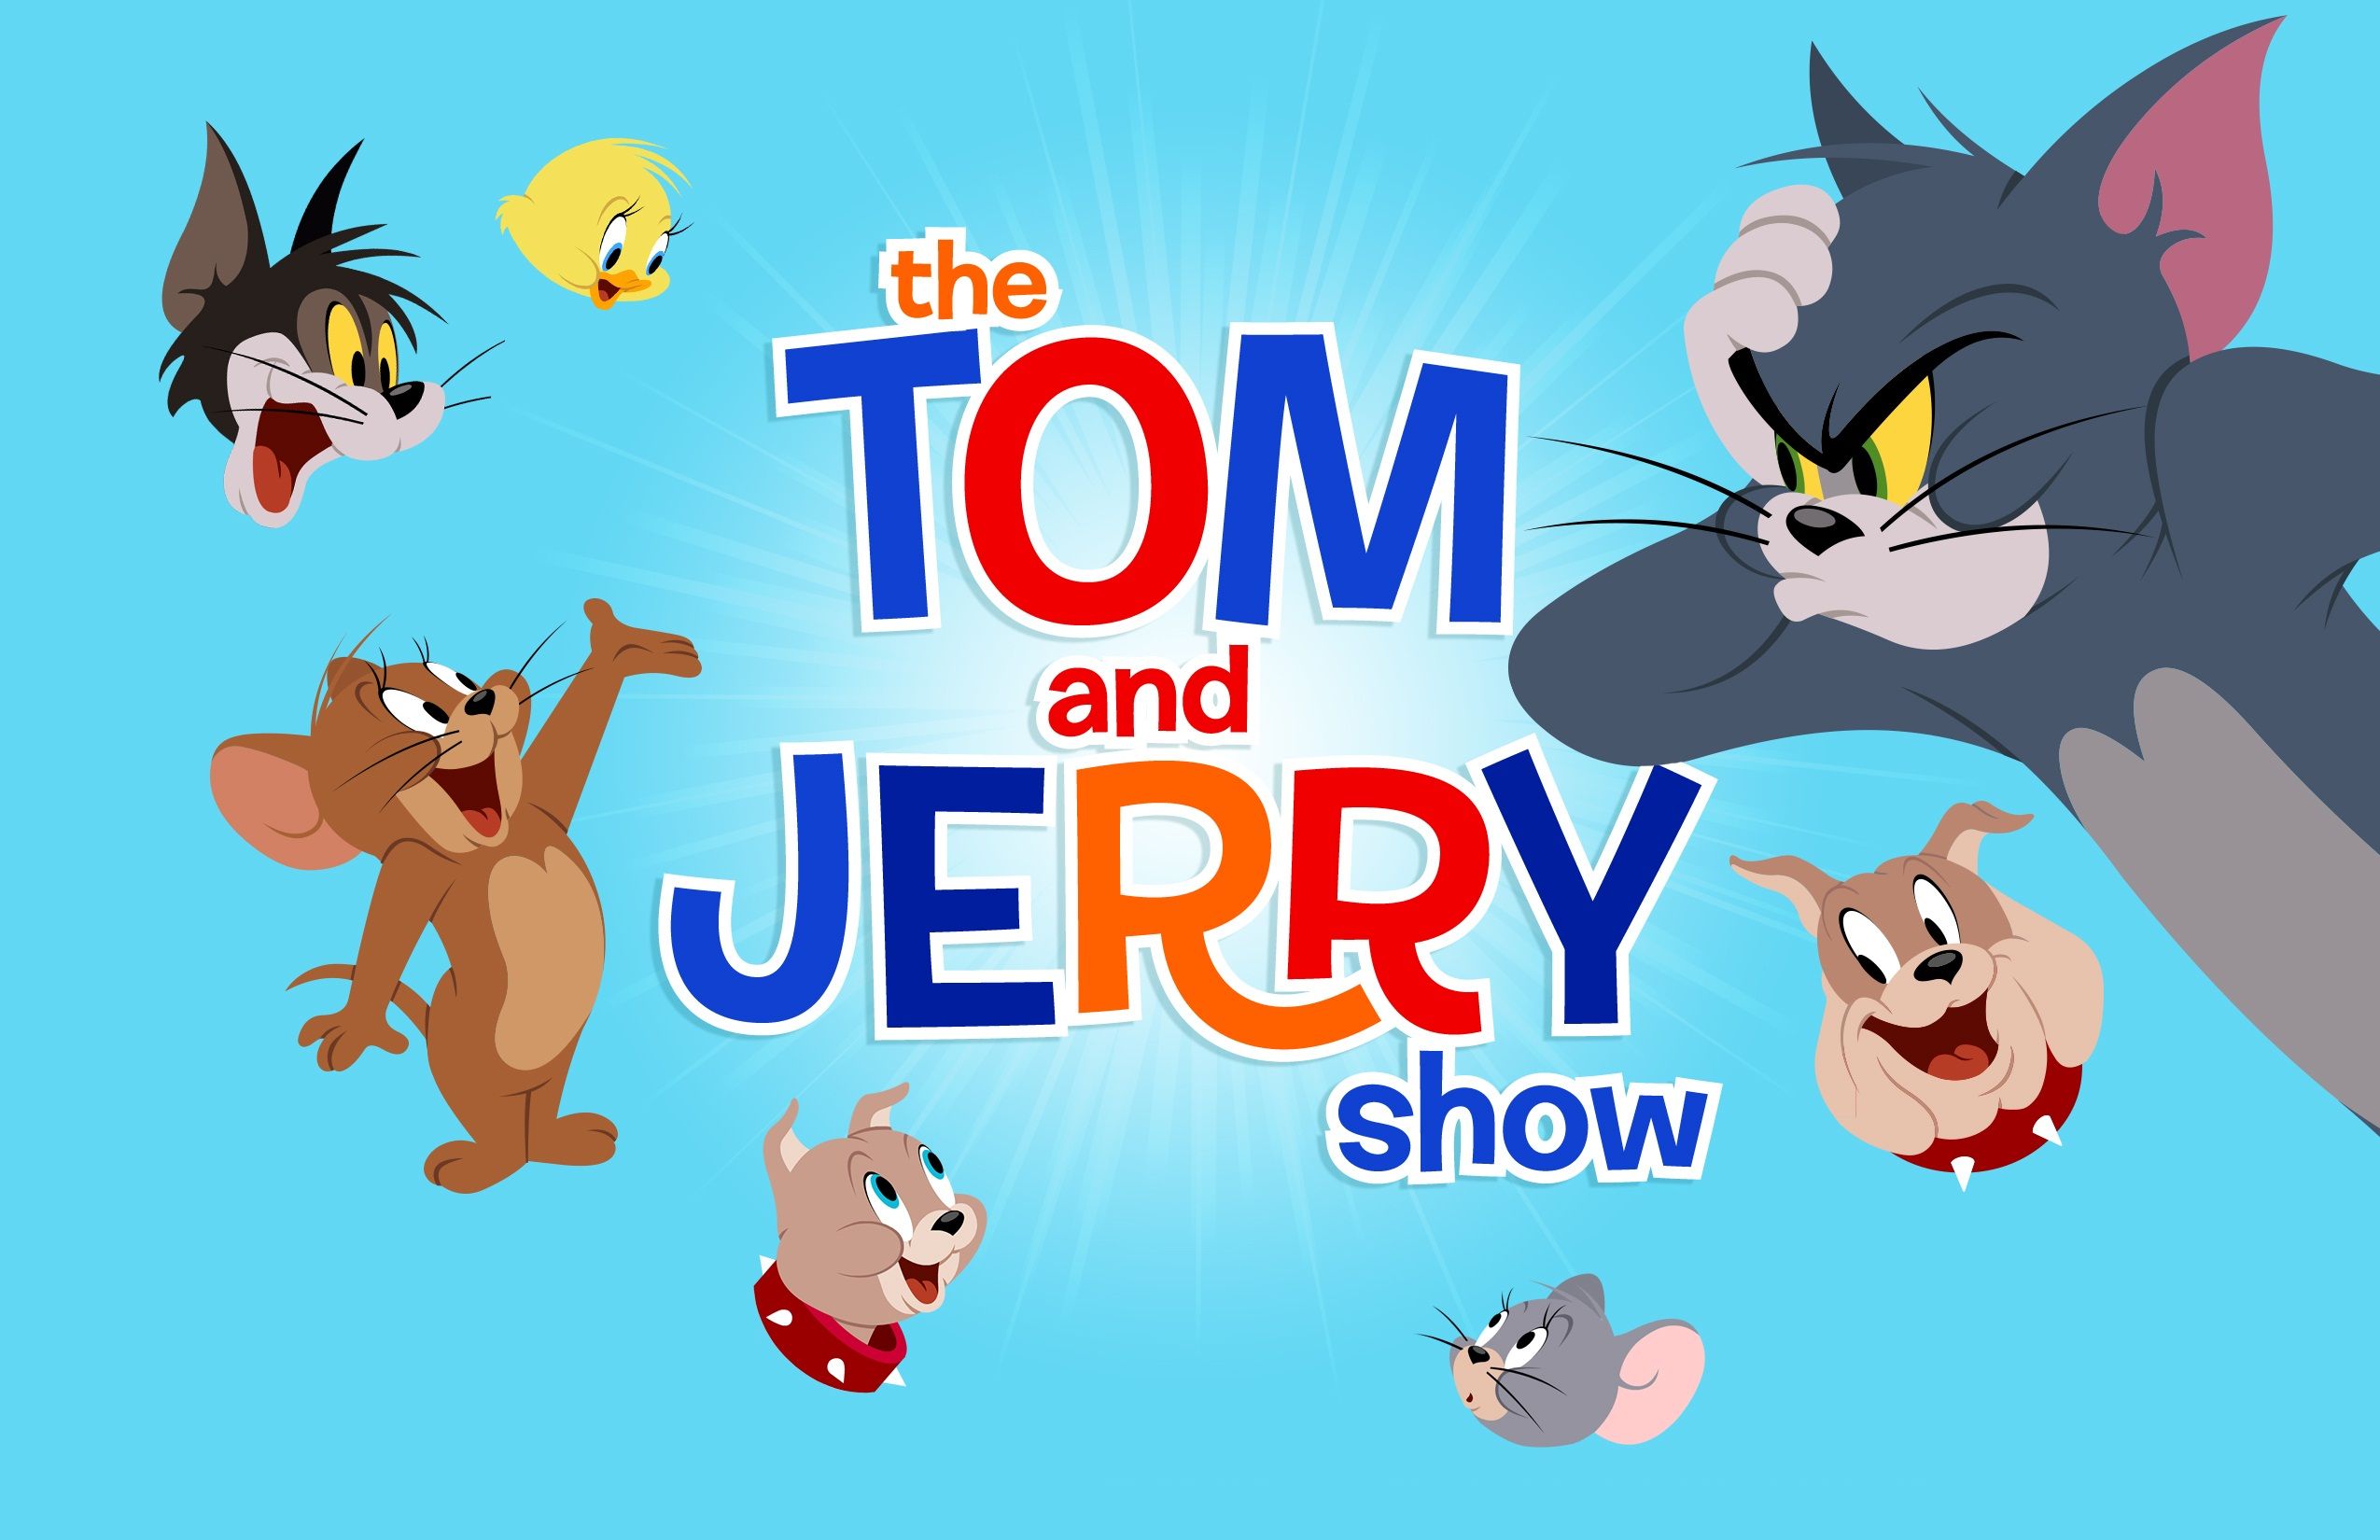 The tom and jerry show - Tom and Jerry